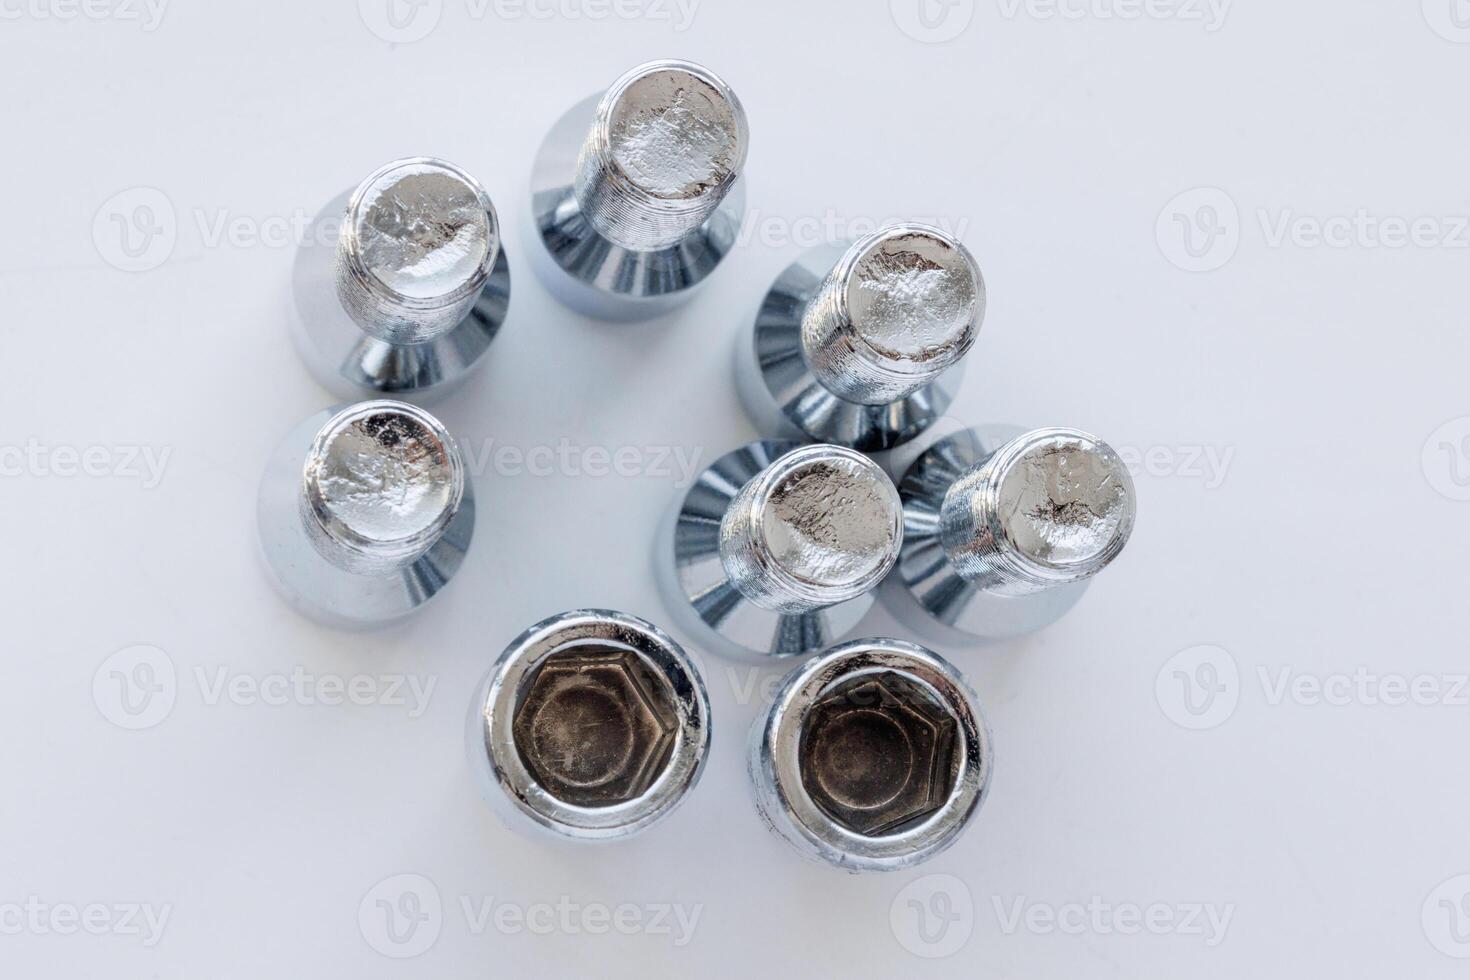 shiny steel chrome coated wheel bolts on white background, full-frame closeup high angle view photo